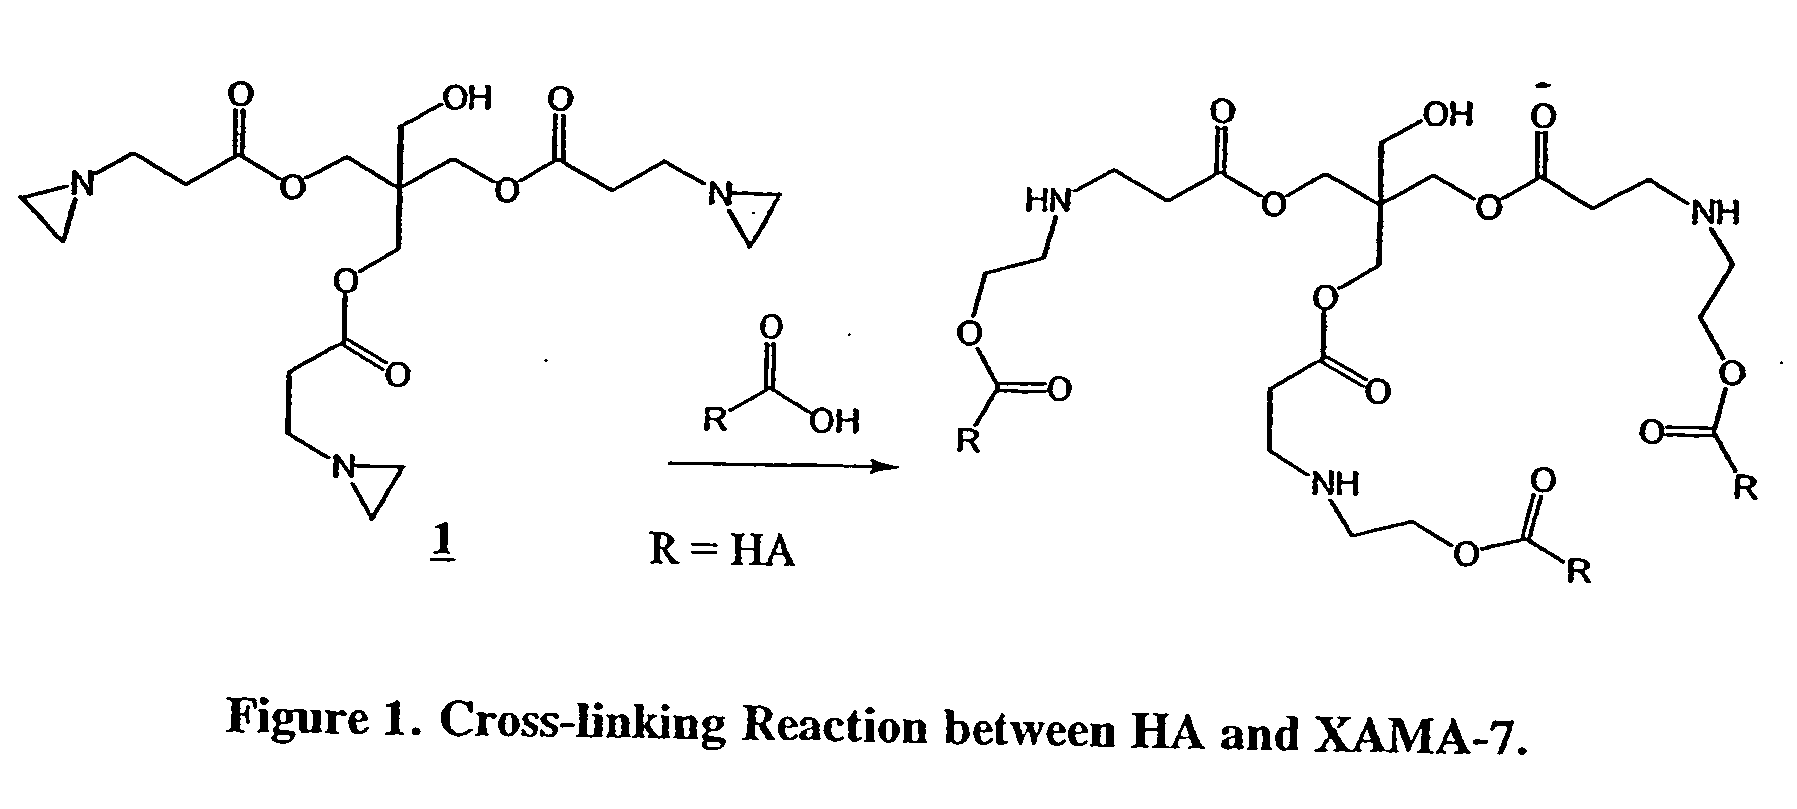 Cross-linked hyaluronate compounds